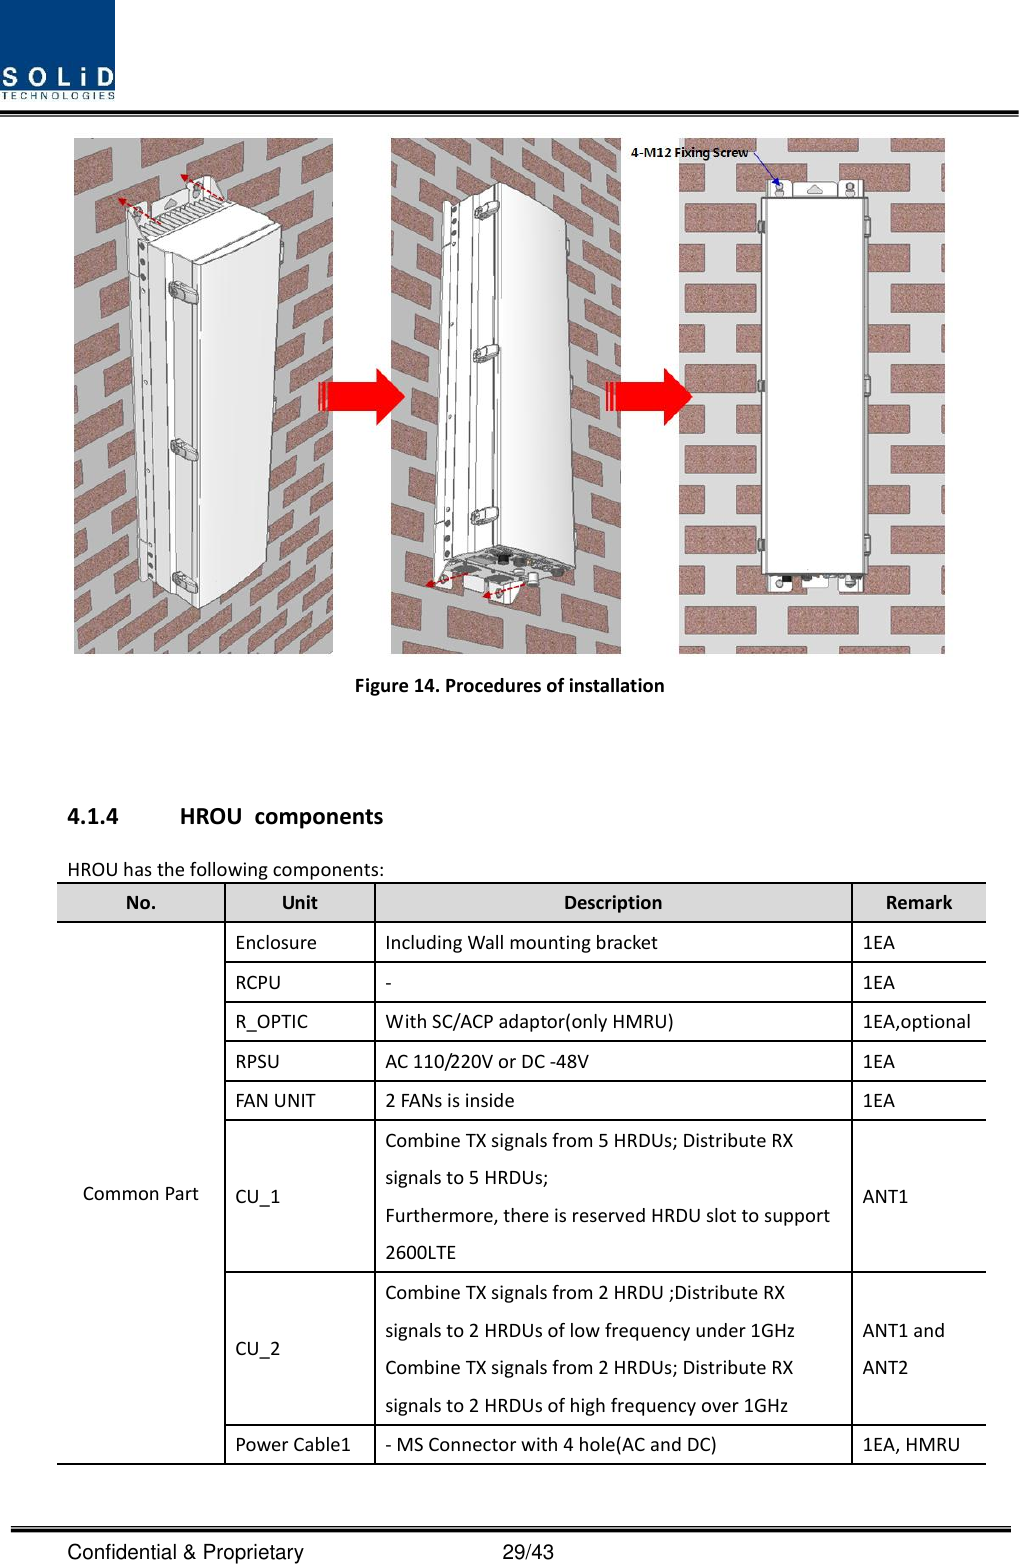  Confidential &amp; Proprietary                                      29/43  Figure 14. Procedures of installation   4.1.4 HROU  components HROU has the following components: No. Unit Description Remark Common Part Enclosure Including Wall mounting bracket 1EA RCPU - 1EA R_OPTIC With SC/ACP adaptor(only HMRU) 1EA,optional RPSU AC 110/220V or DC -48V 1EA FAN UNIT 2 FANs is inside 1EA CU_1 Combine TX signals from 5 HRDUs; Distribute RX signals to 5 HRDUs; Furthermore, there is reserved HRDU slot to support 2600LTE ANT1 CU_2 Combine TX signals from 2 HRDU ;Distribute RX signals to 2 HRDUs of low frequency under 1GHz   Combine TX signals from 2 HRDUs; Distribute RX signals to 2 HRDUs of high frequency over 1GHz   ANT1 and ANT2 Power Cable1 - MS Connector with 4 hole(AC and DC) 1EA, HMRU 